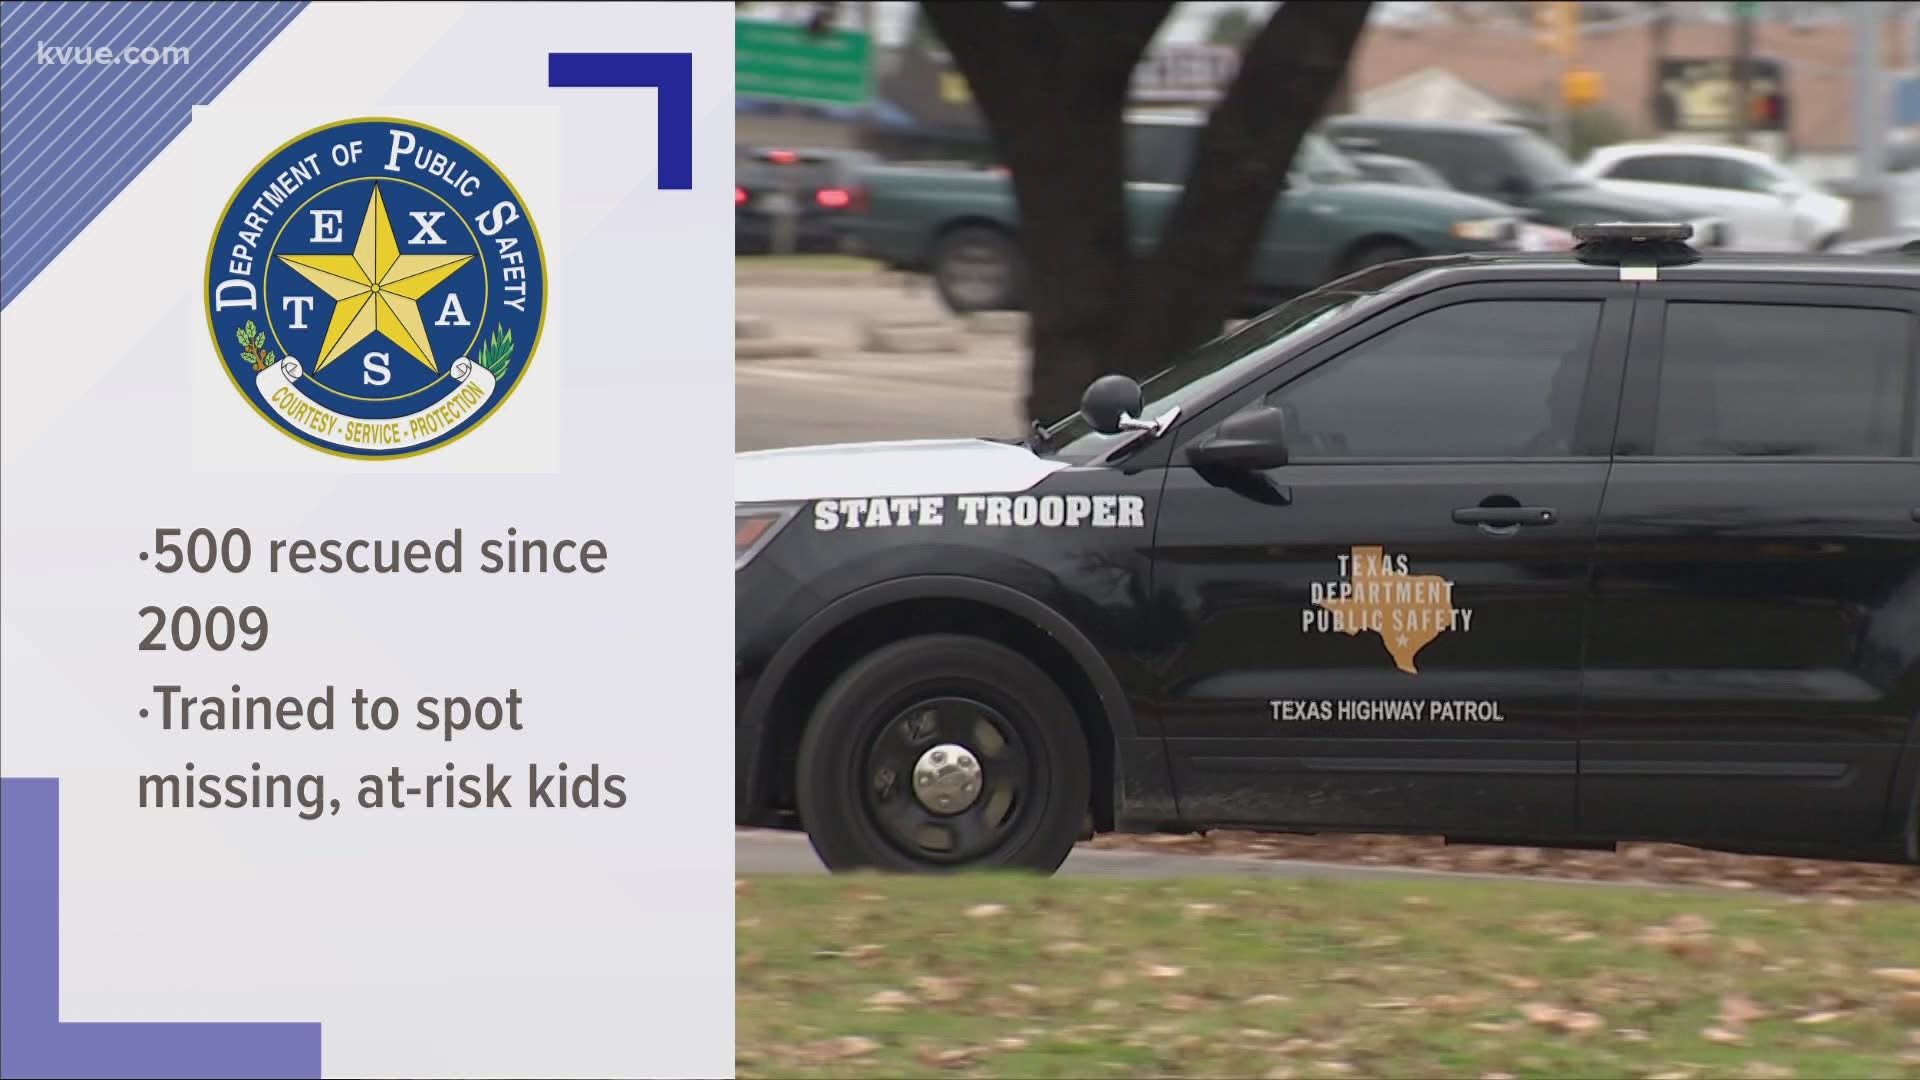 Since 2009, Texas Department of Public Safety troopers have rescued 500 children during traffic stops.